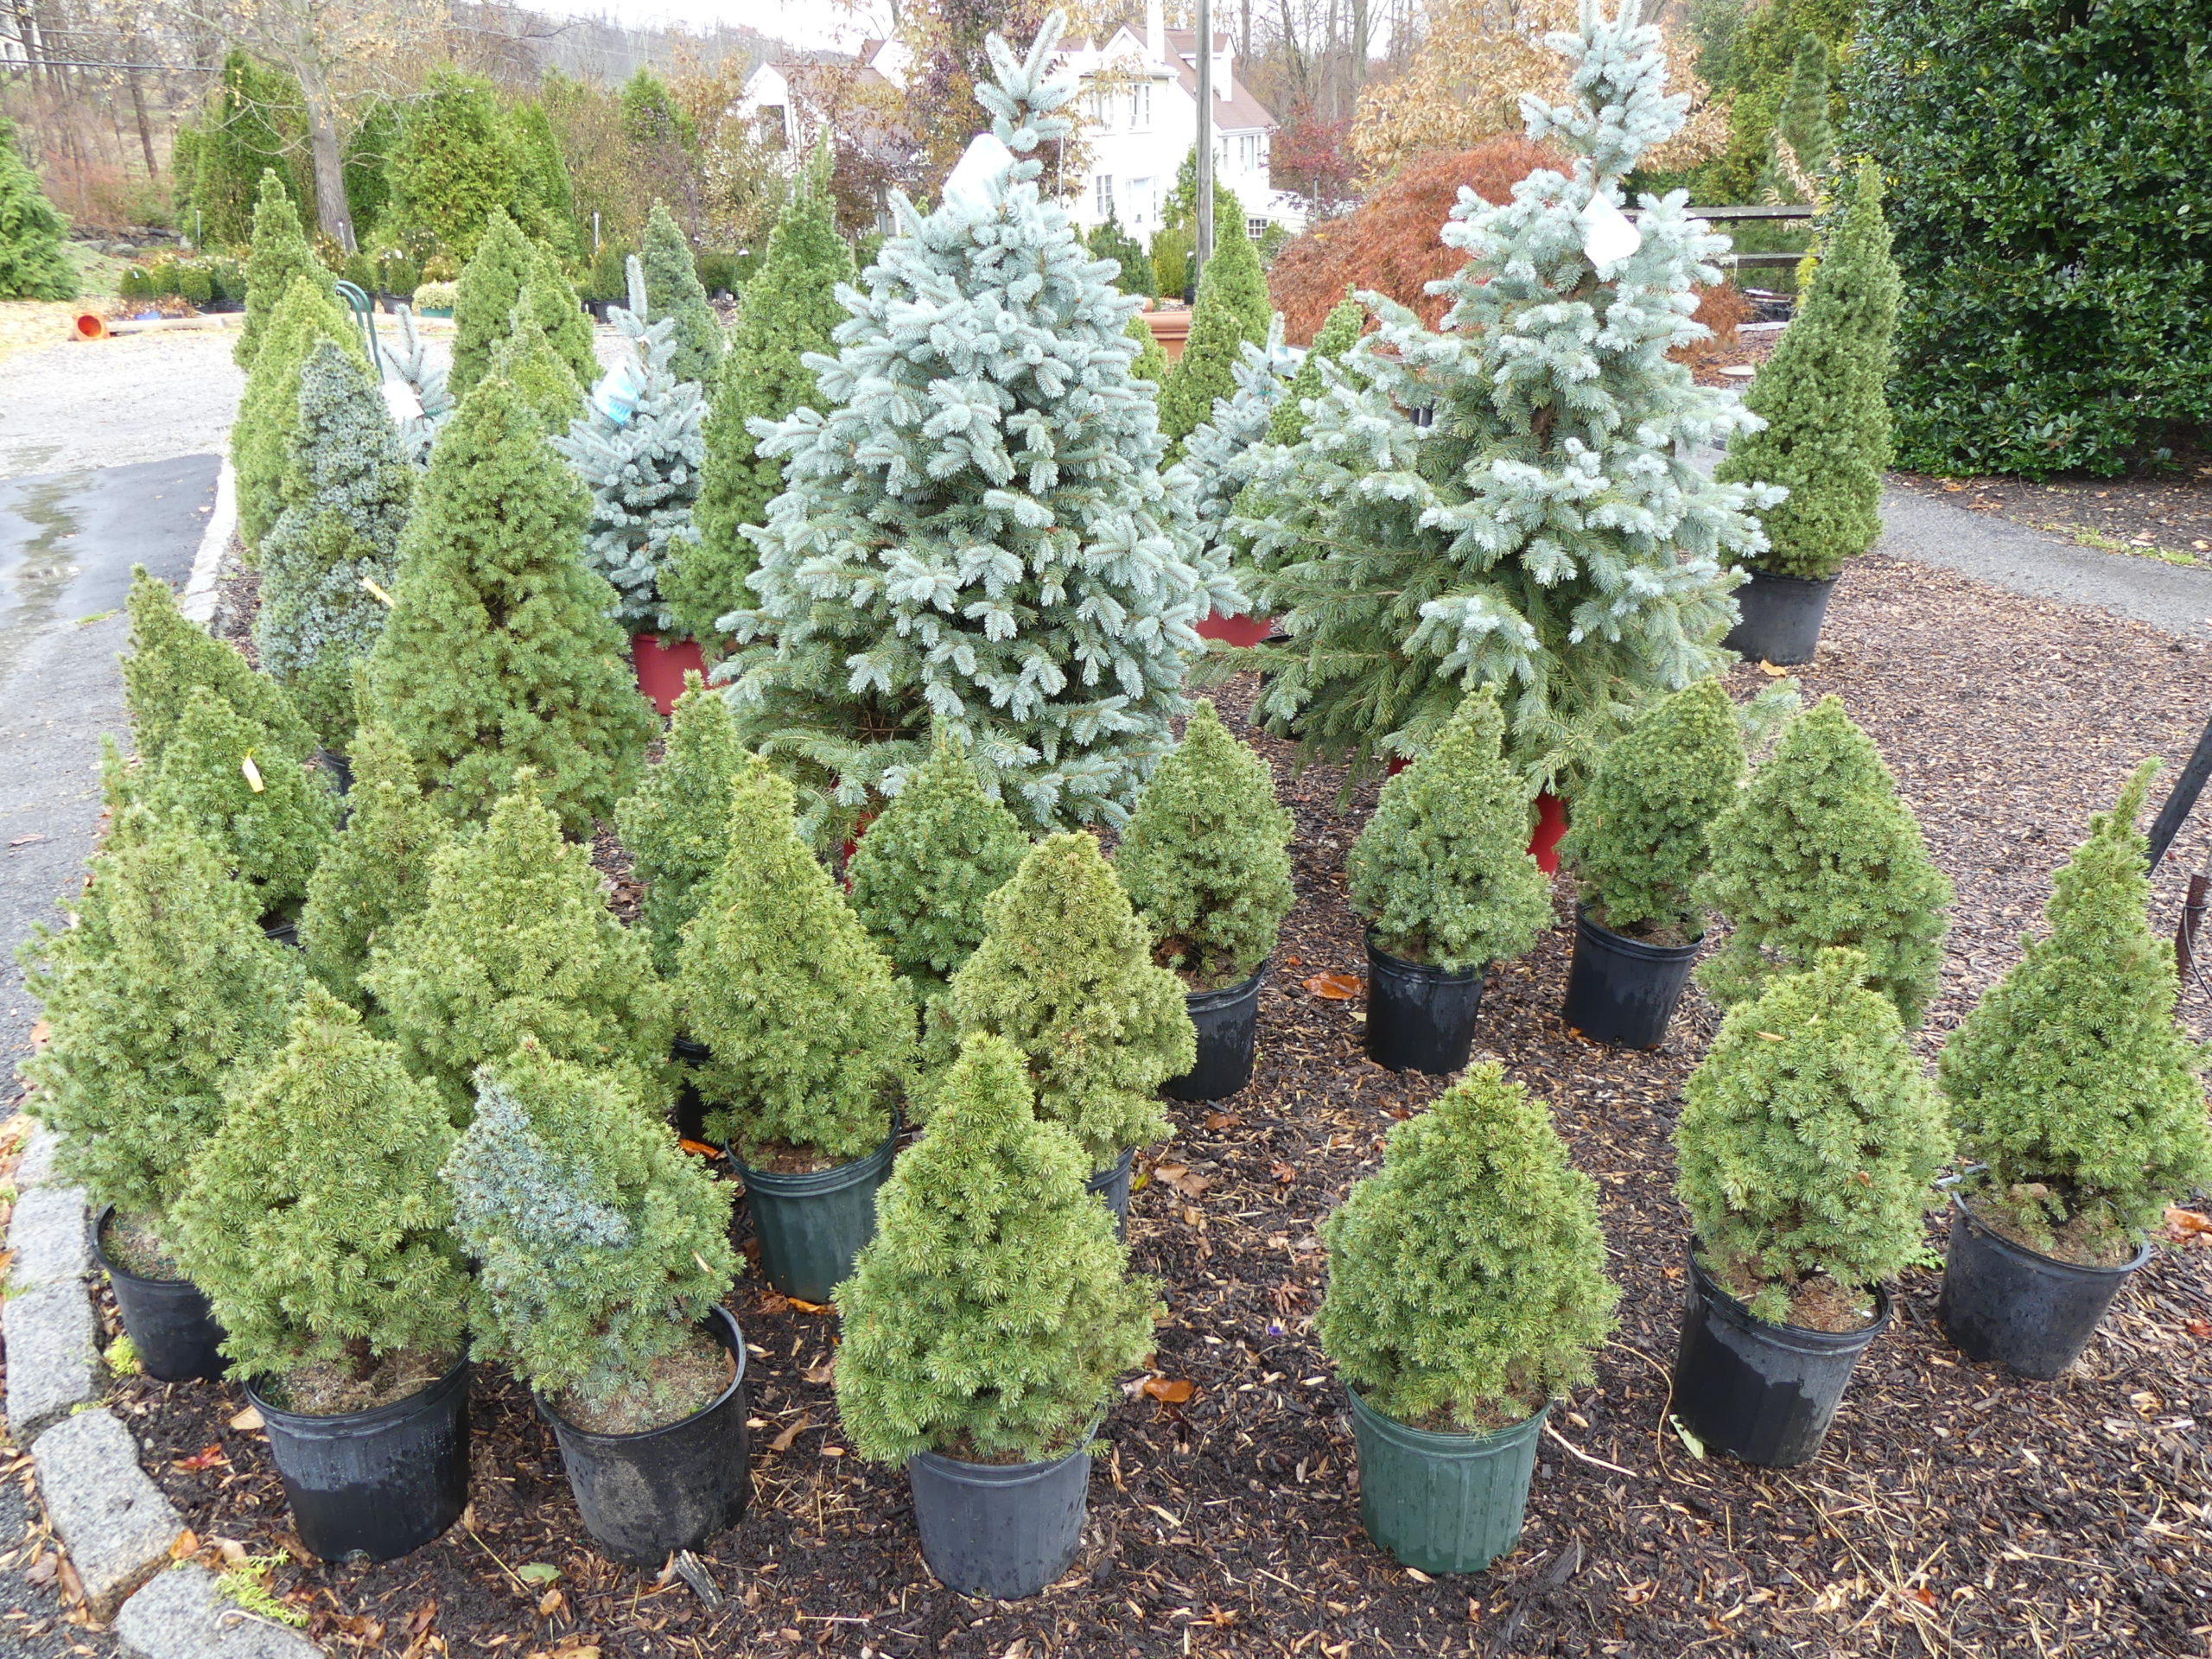 Potted or containerized Christmas trees are popular now because they can be used indoors for several days then planted out in the landscape. Just like cut trees, they need to be watered indoors and out.